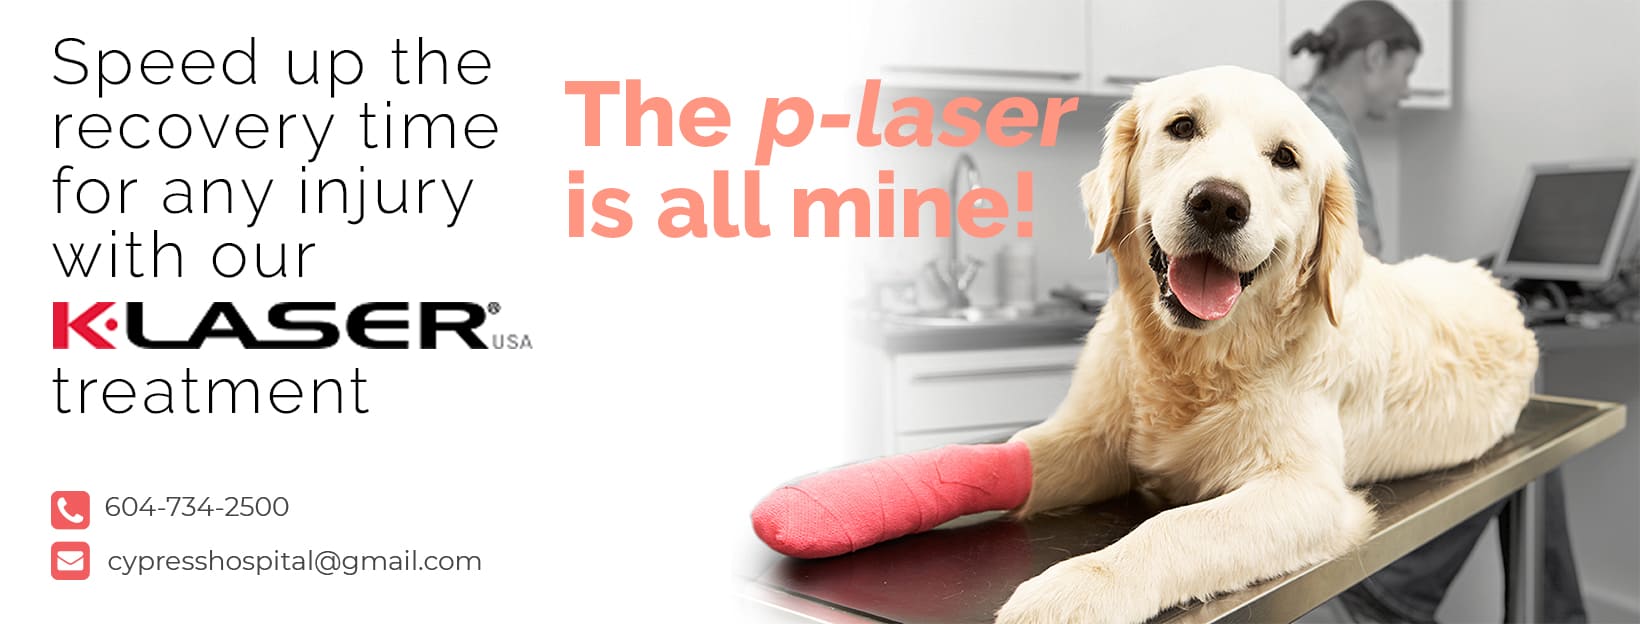 The Benefits of K-Laser Therapy Treatments